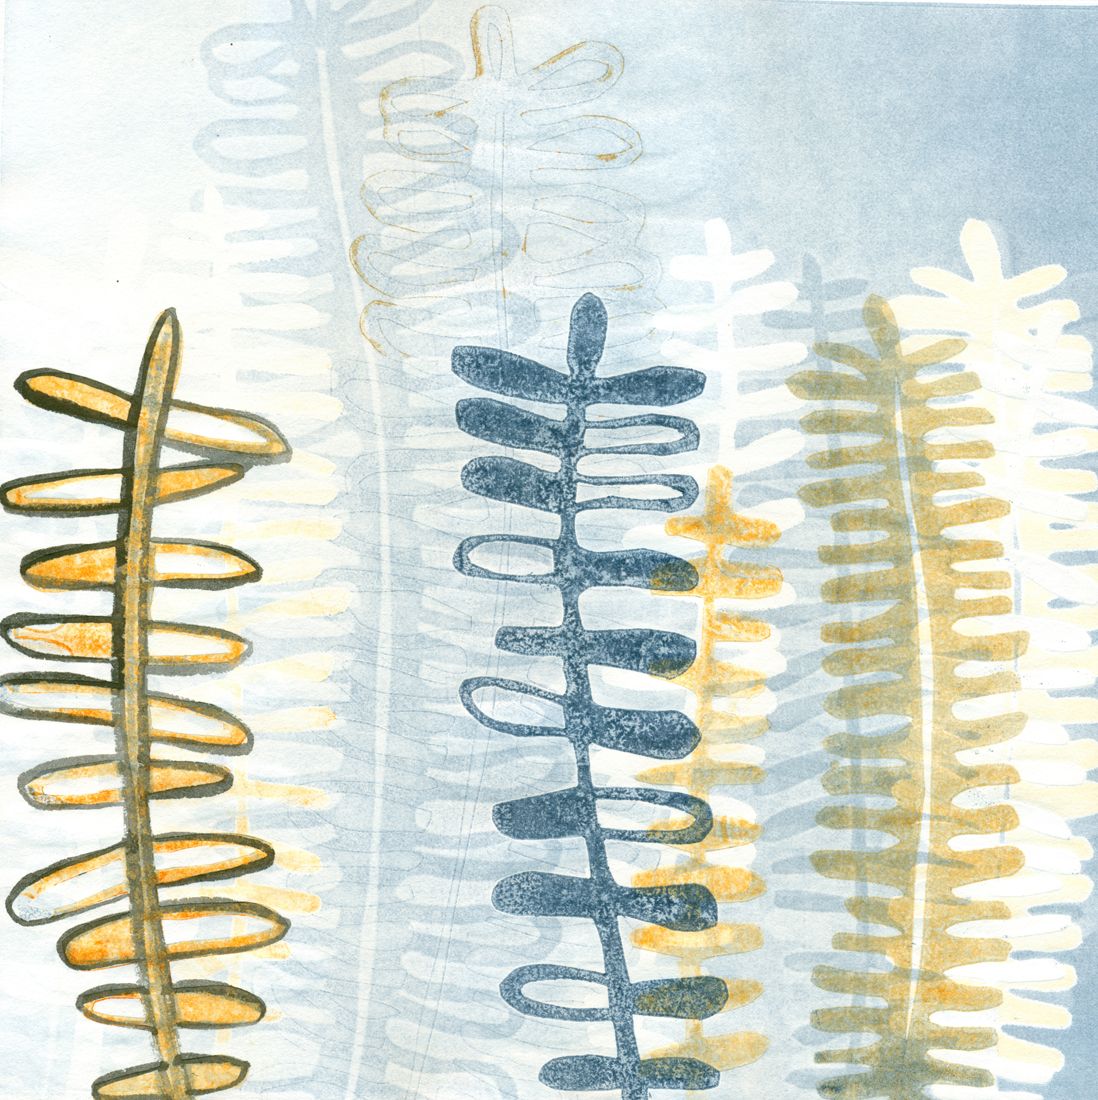 10" x 10" mixed media botanical piece with a fern pattern in indigo blue, orange and white, monoprint with paint